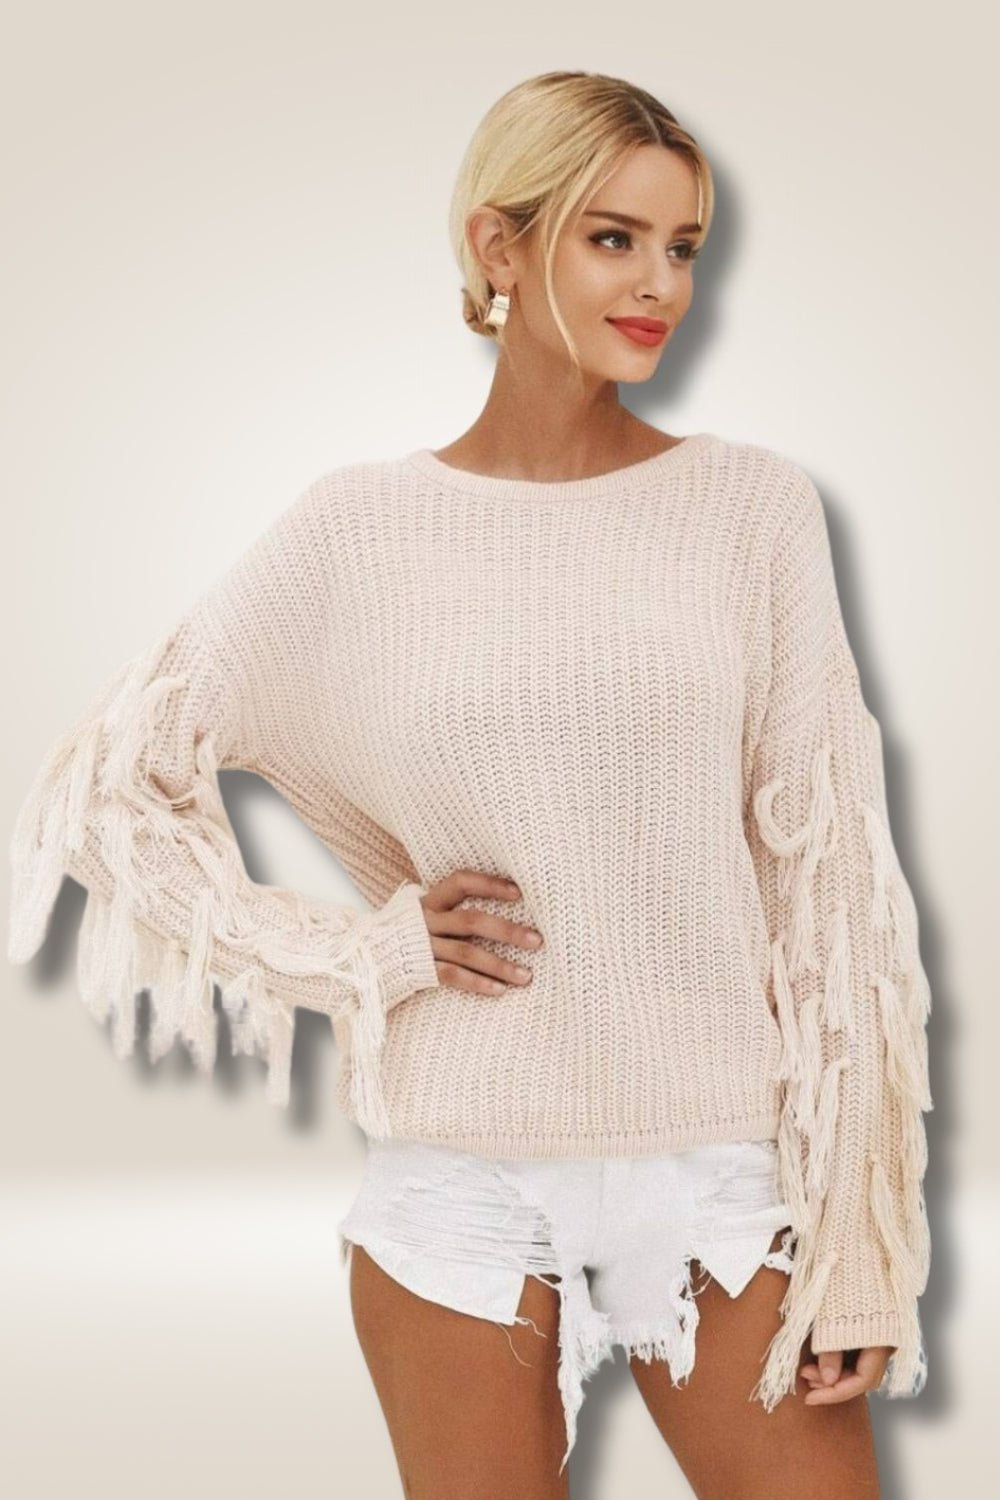 Comfy Fringe Knit Pink Sweater - TGC Boutique - Sweaters